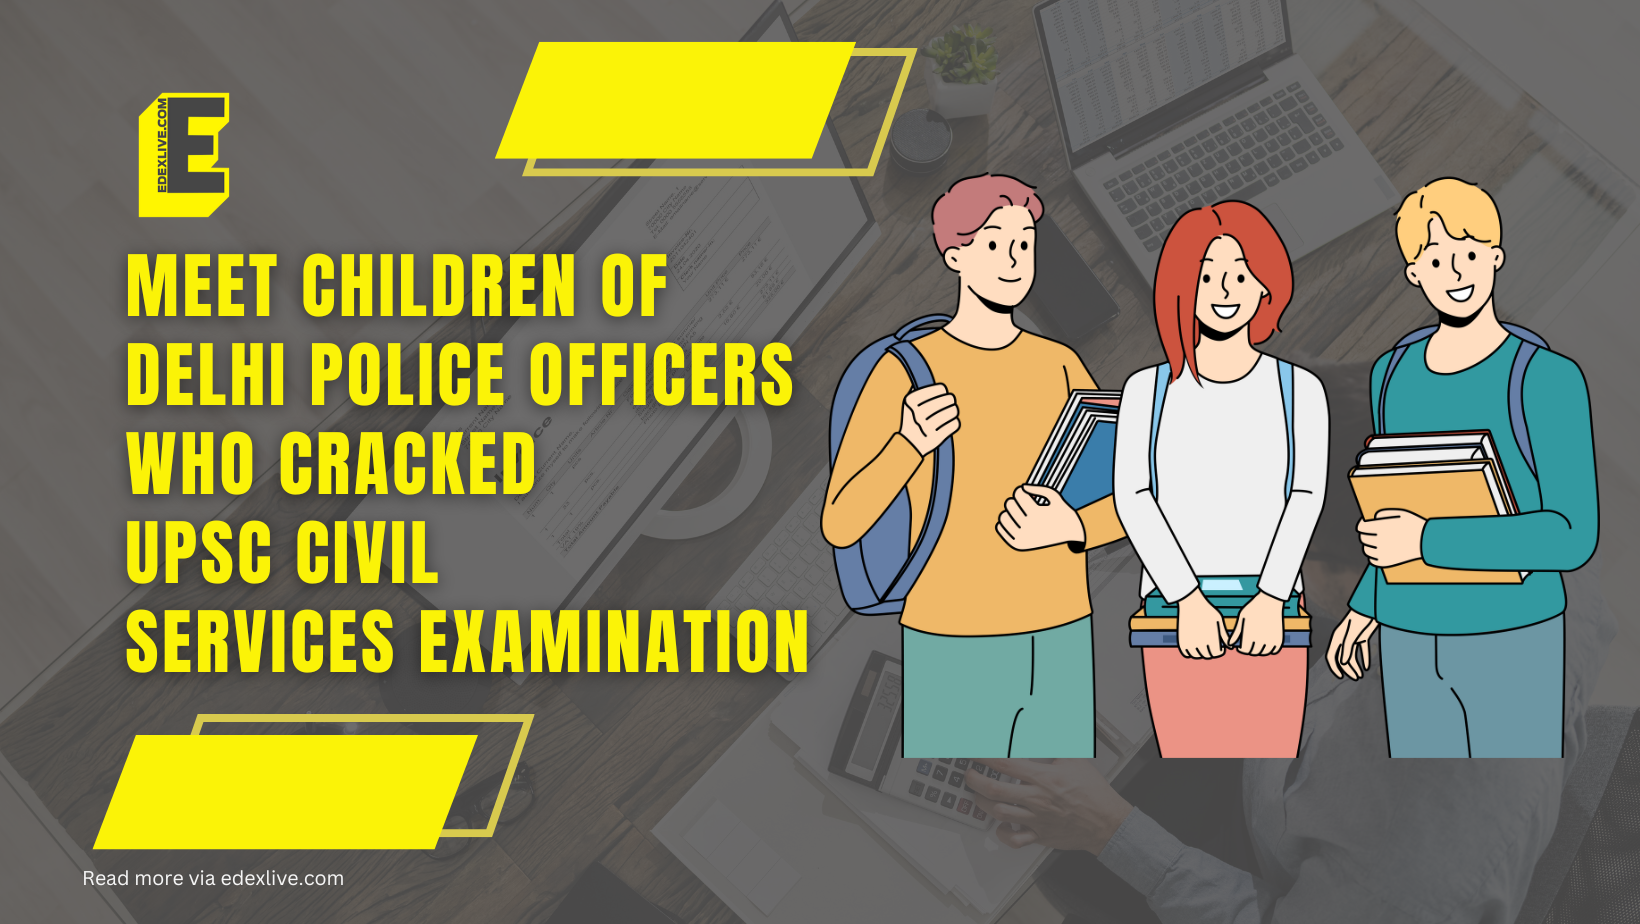 meet children of delhi police officers who cracked upsc civil services examination